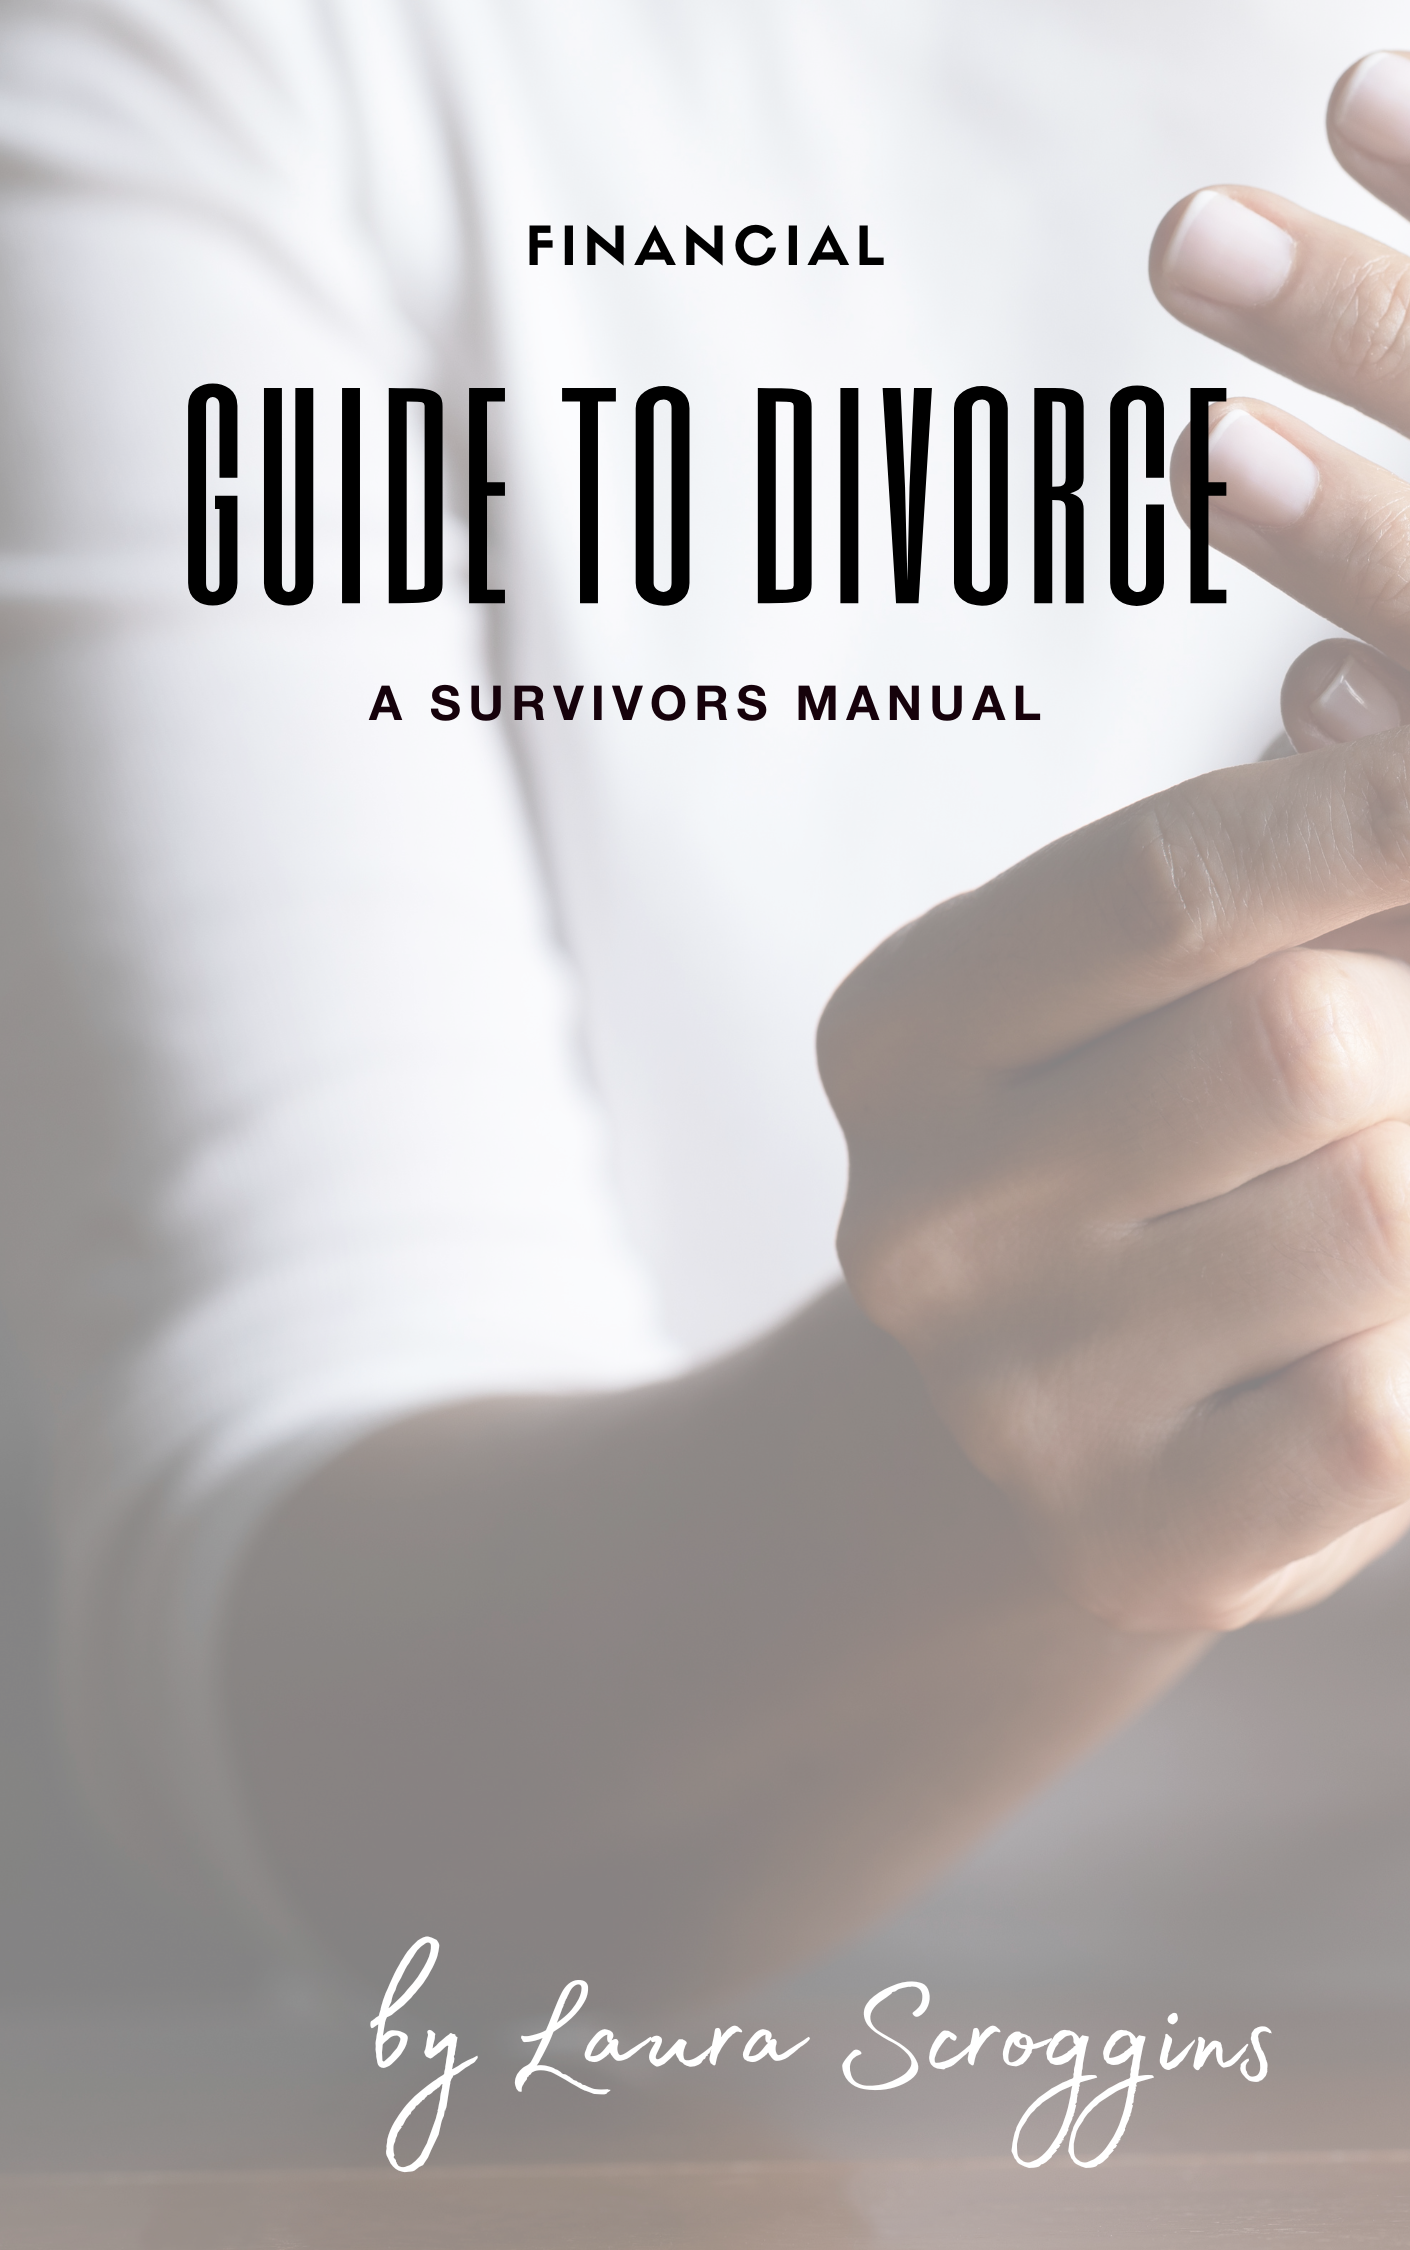 Financial Guide to Divorce